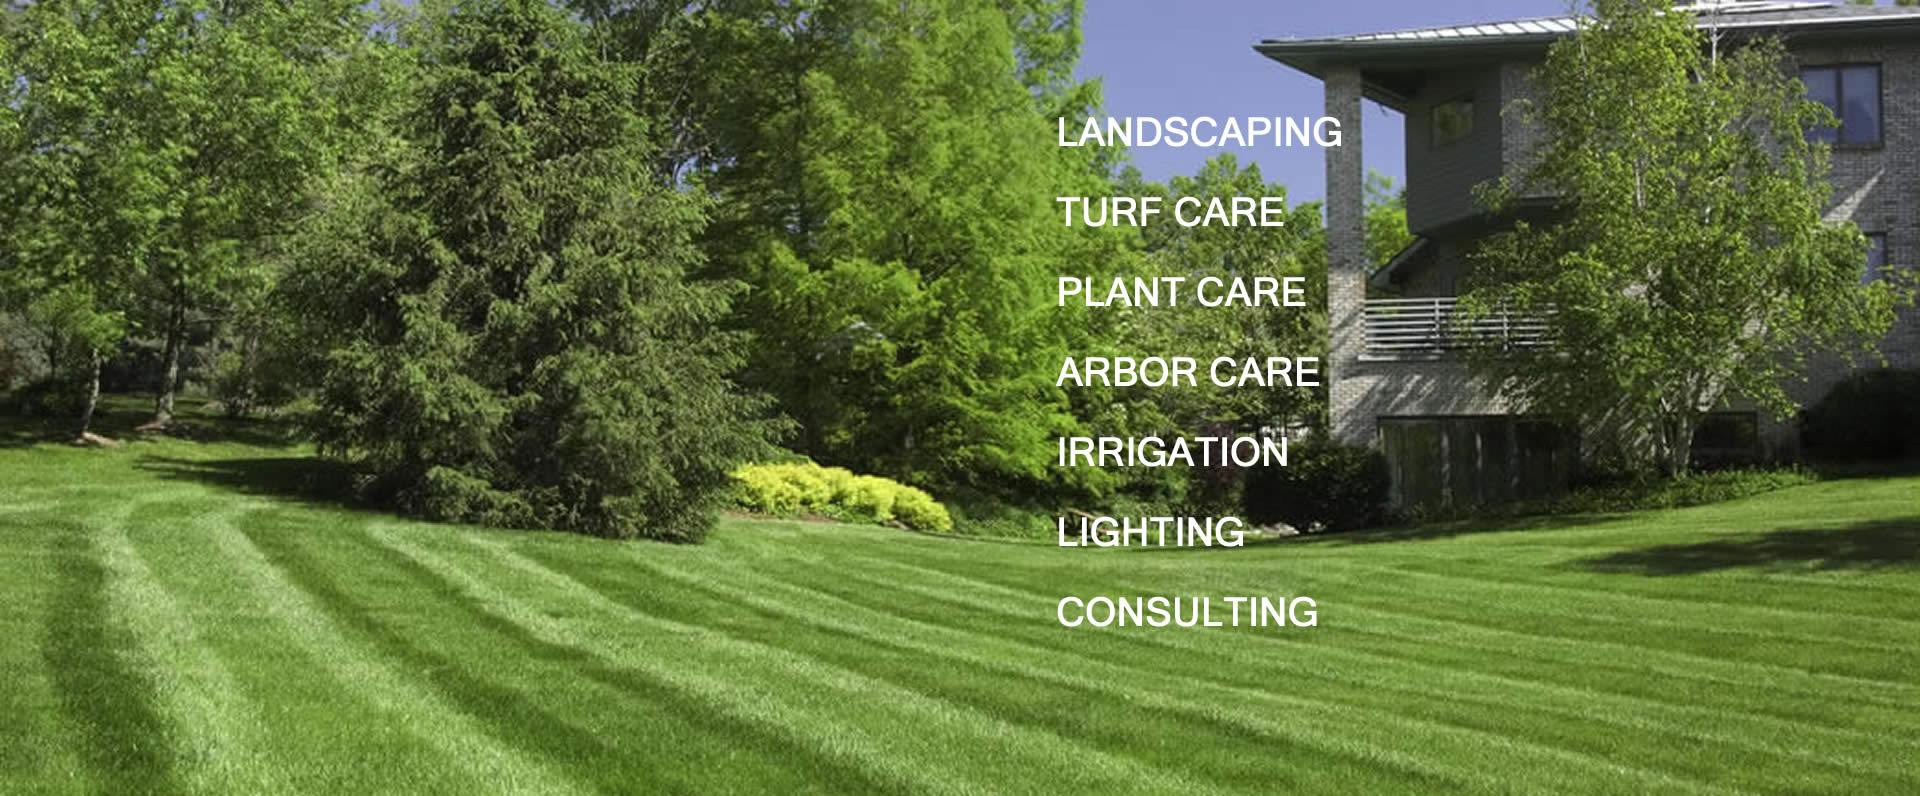 Landscaping Services Lawn Care, Landscaping Louisville Ky